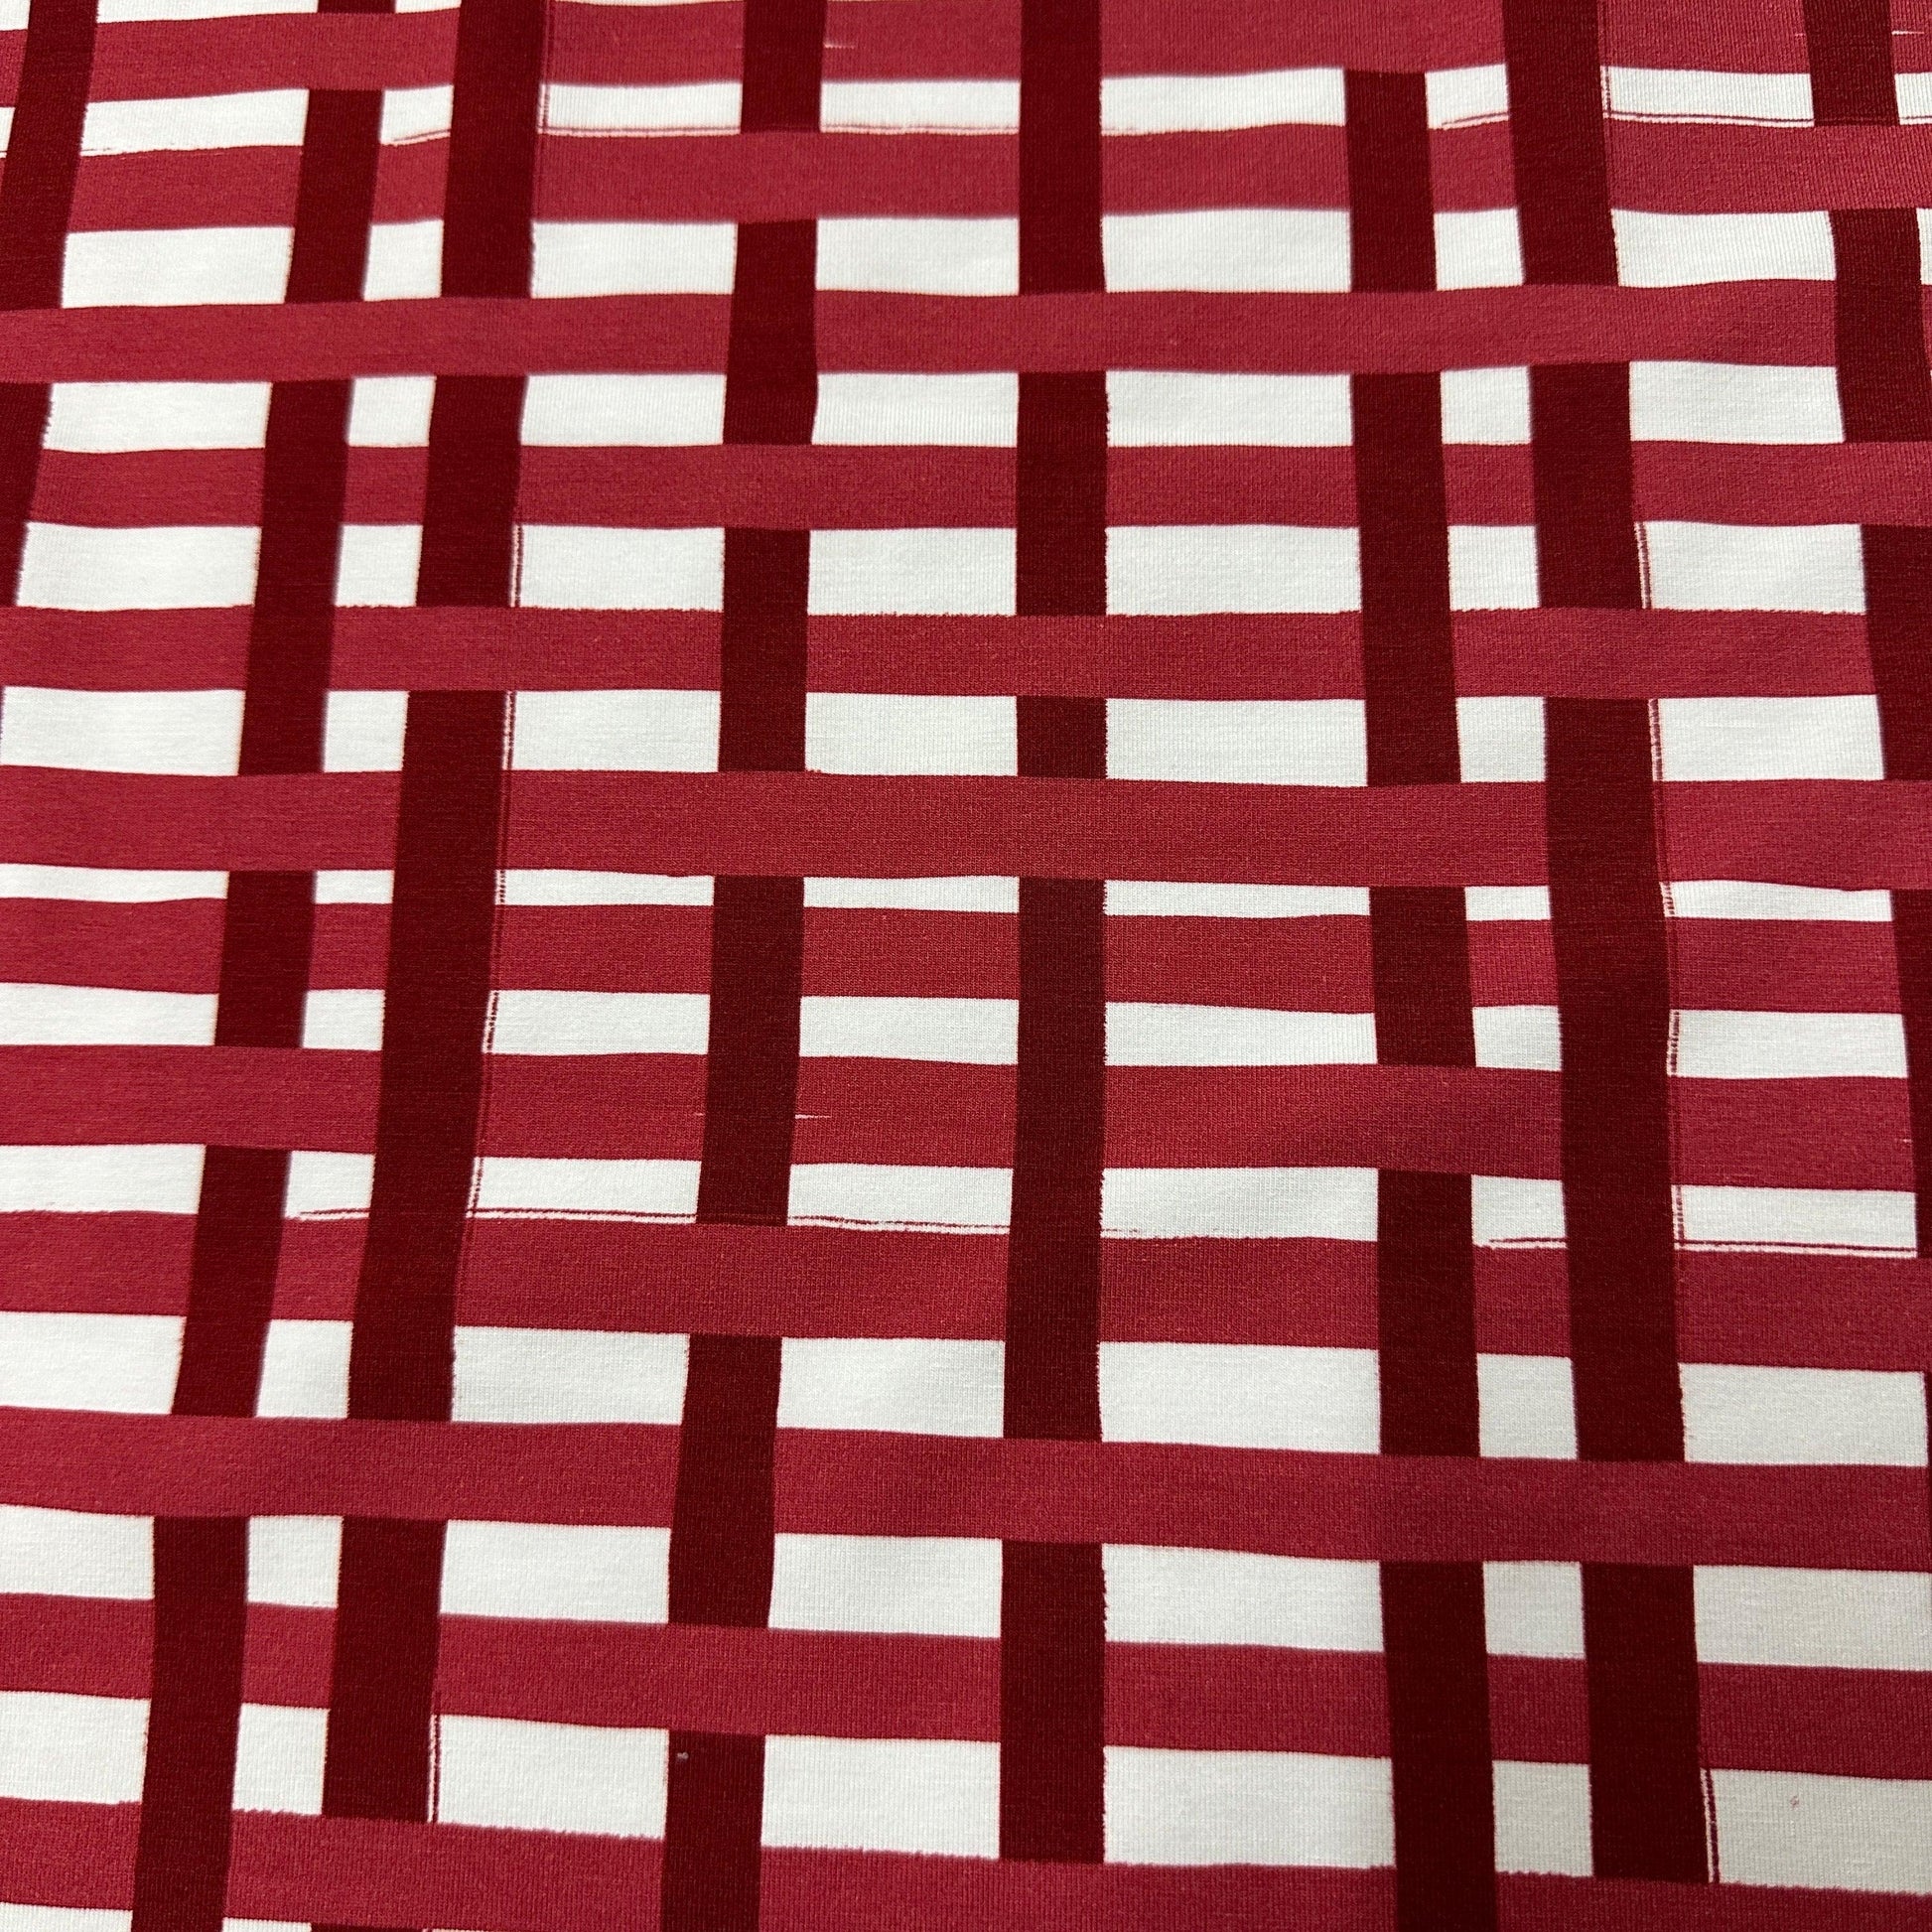 Red and White Plaid on Bamboo/Spandex Jersey Fabric - Nature's Fabrics